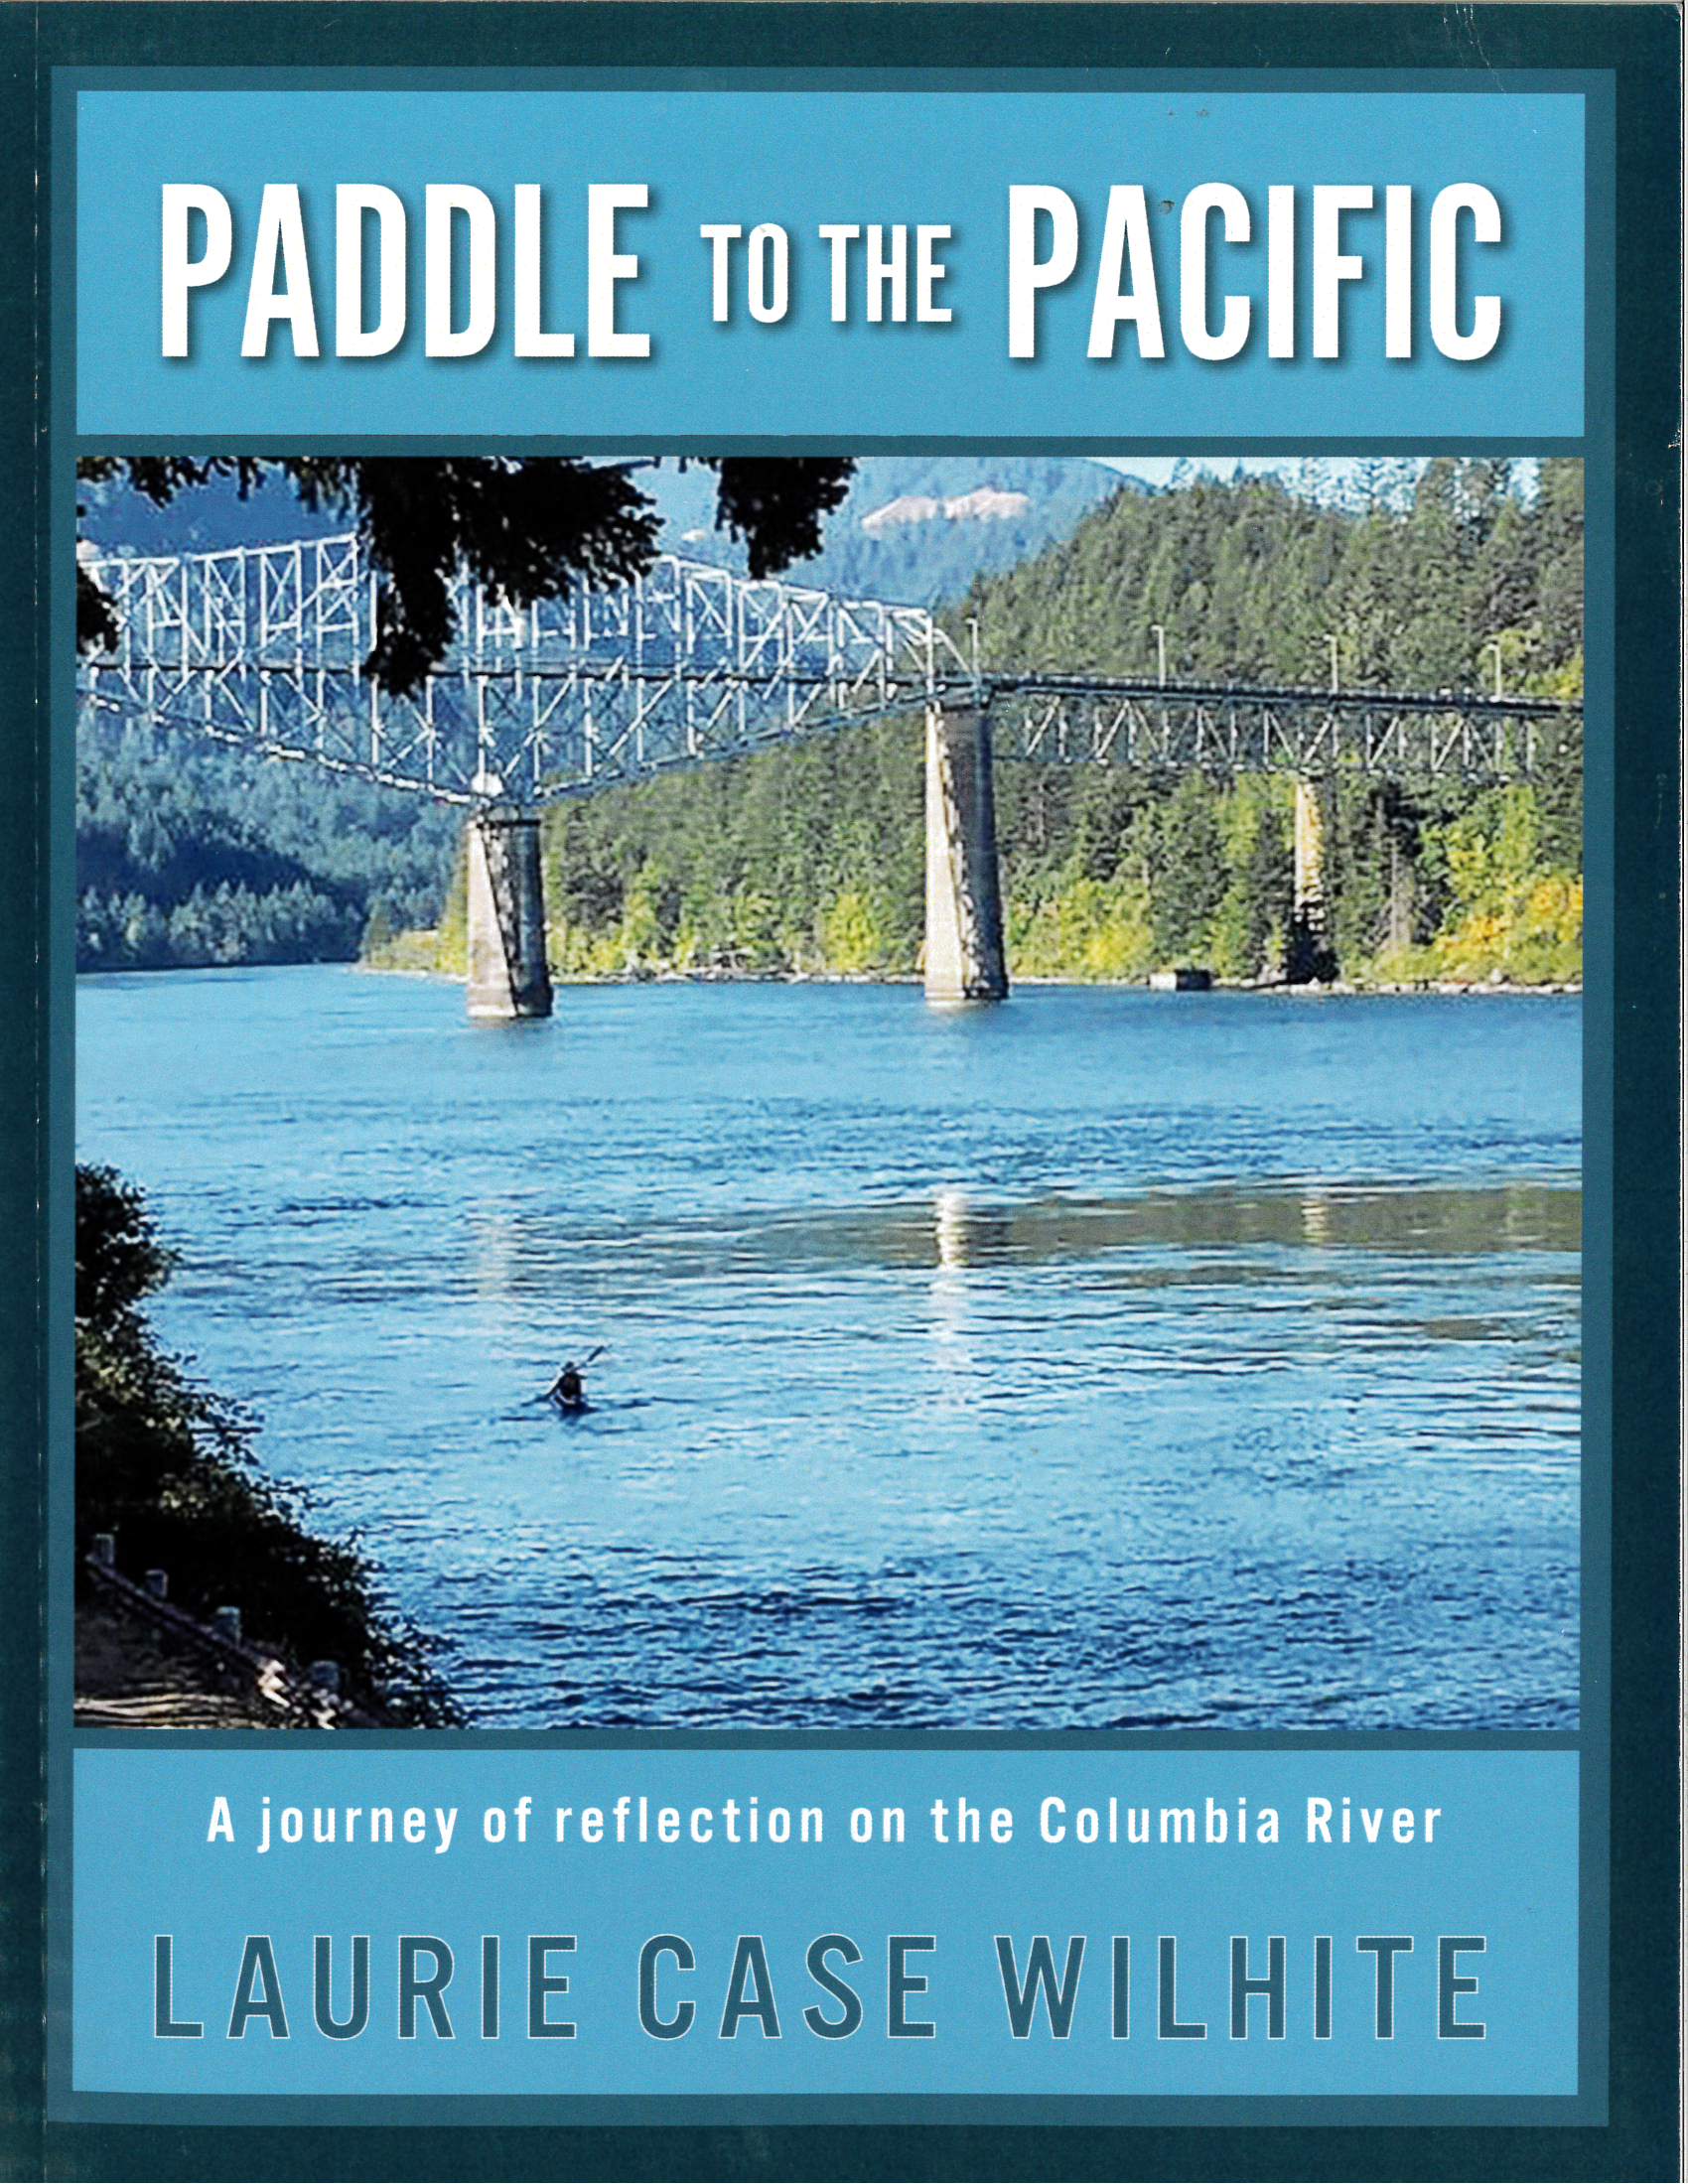 Book cover: Paddle To The Pacific by Laurie Case Wilhite